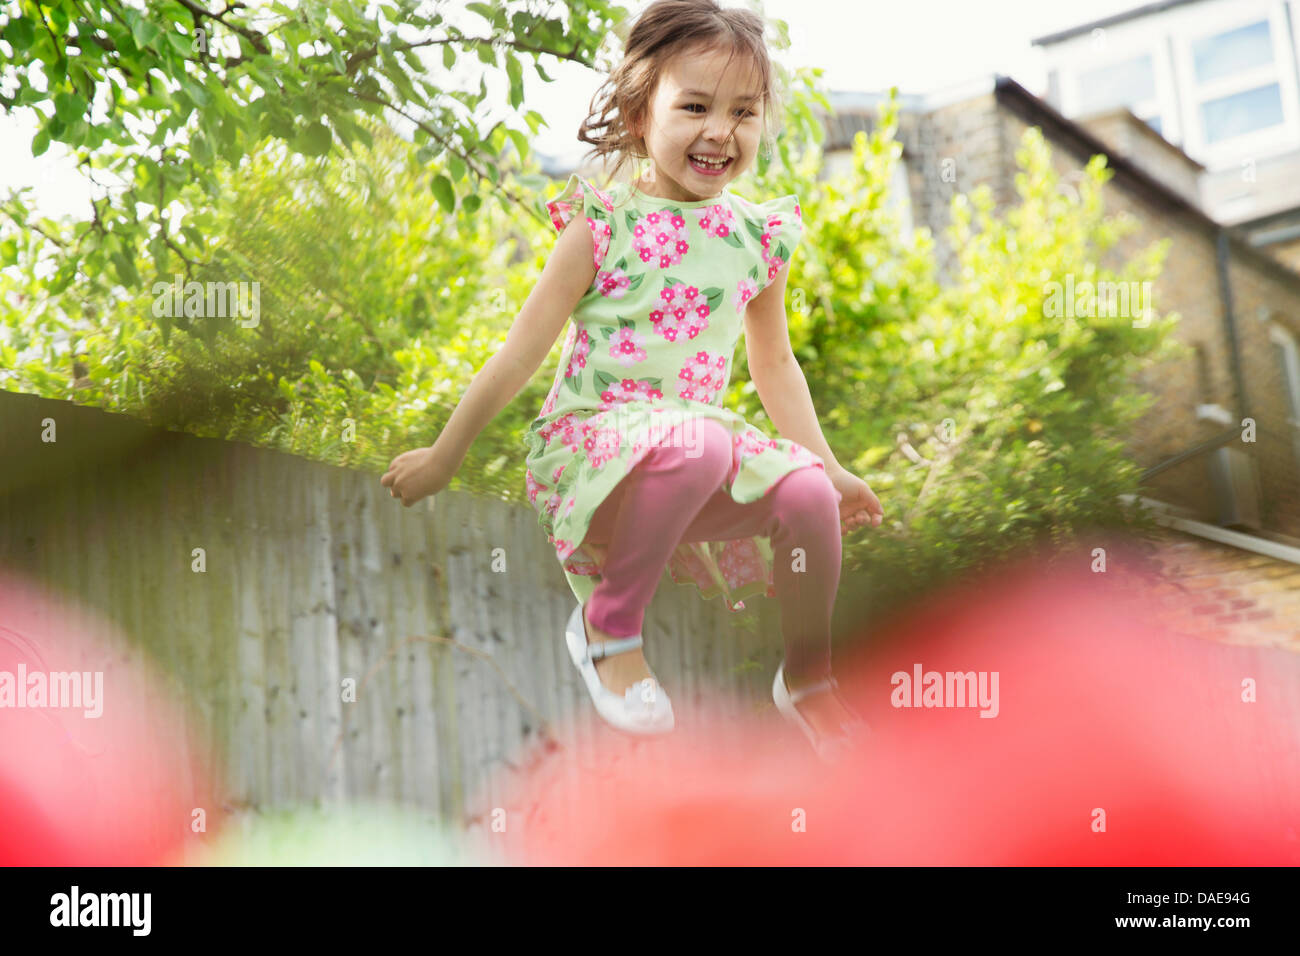 Young Girl jumping mid air in garden Banque D'Images